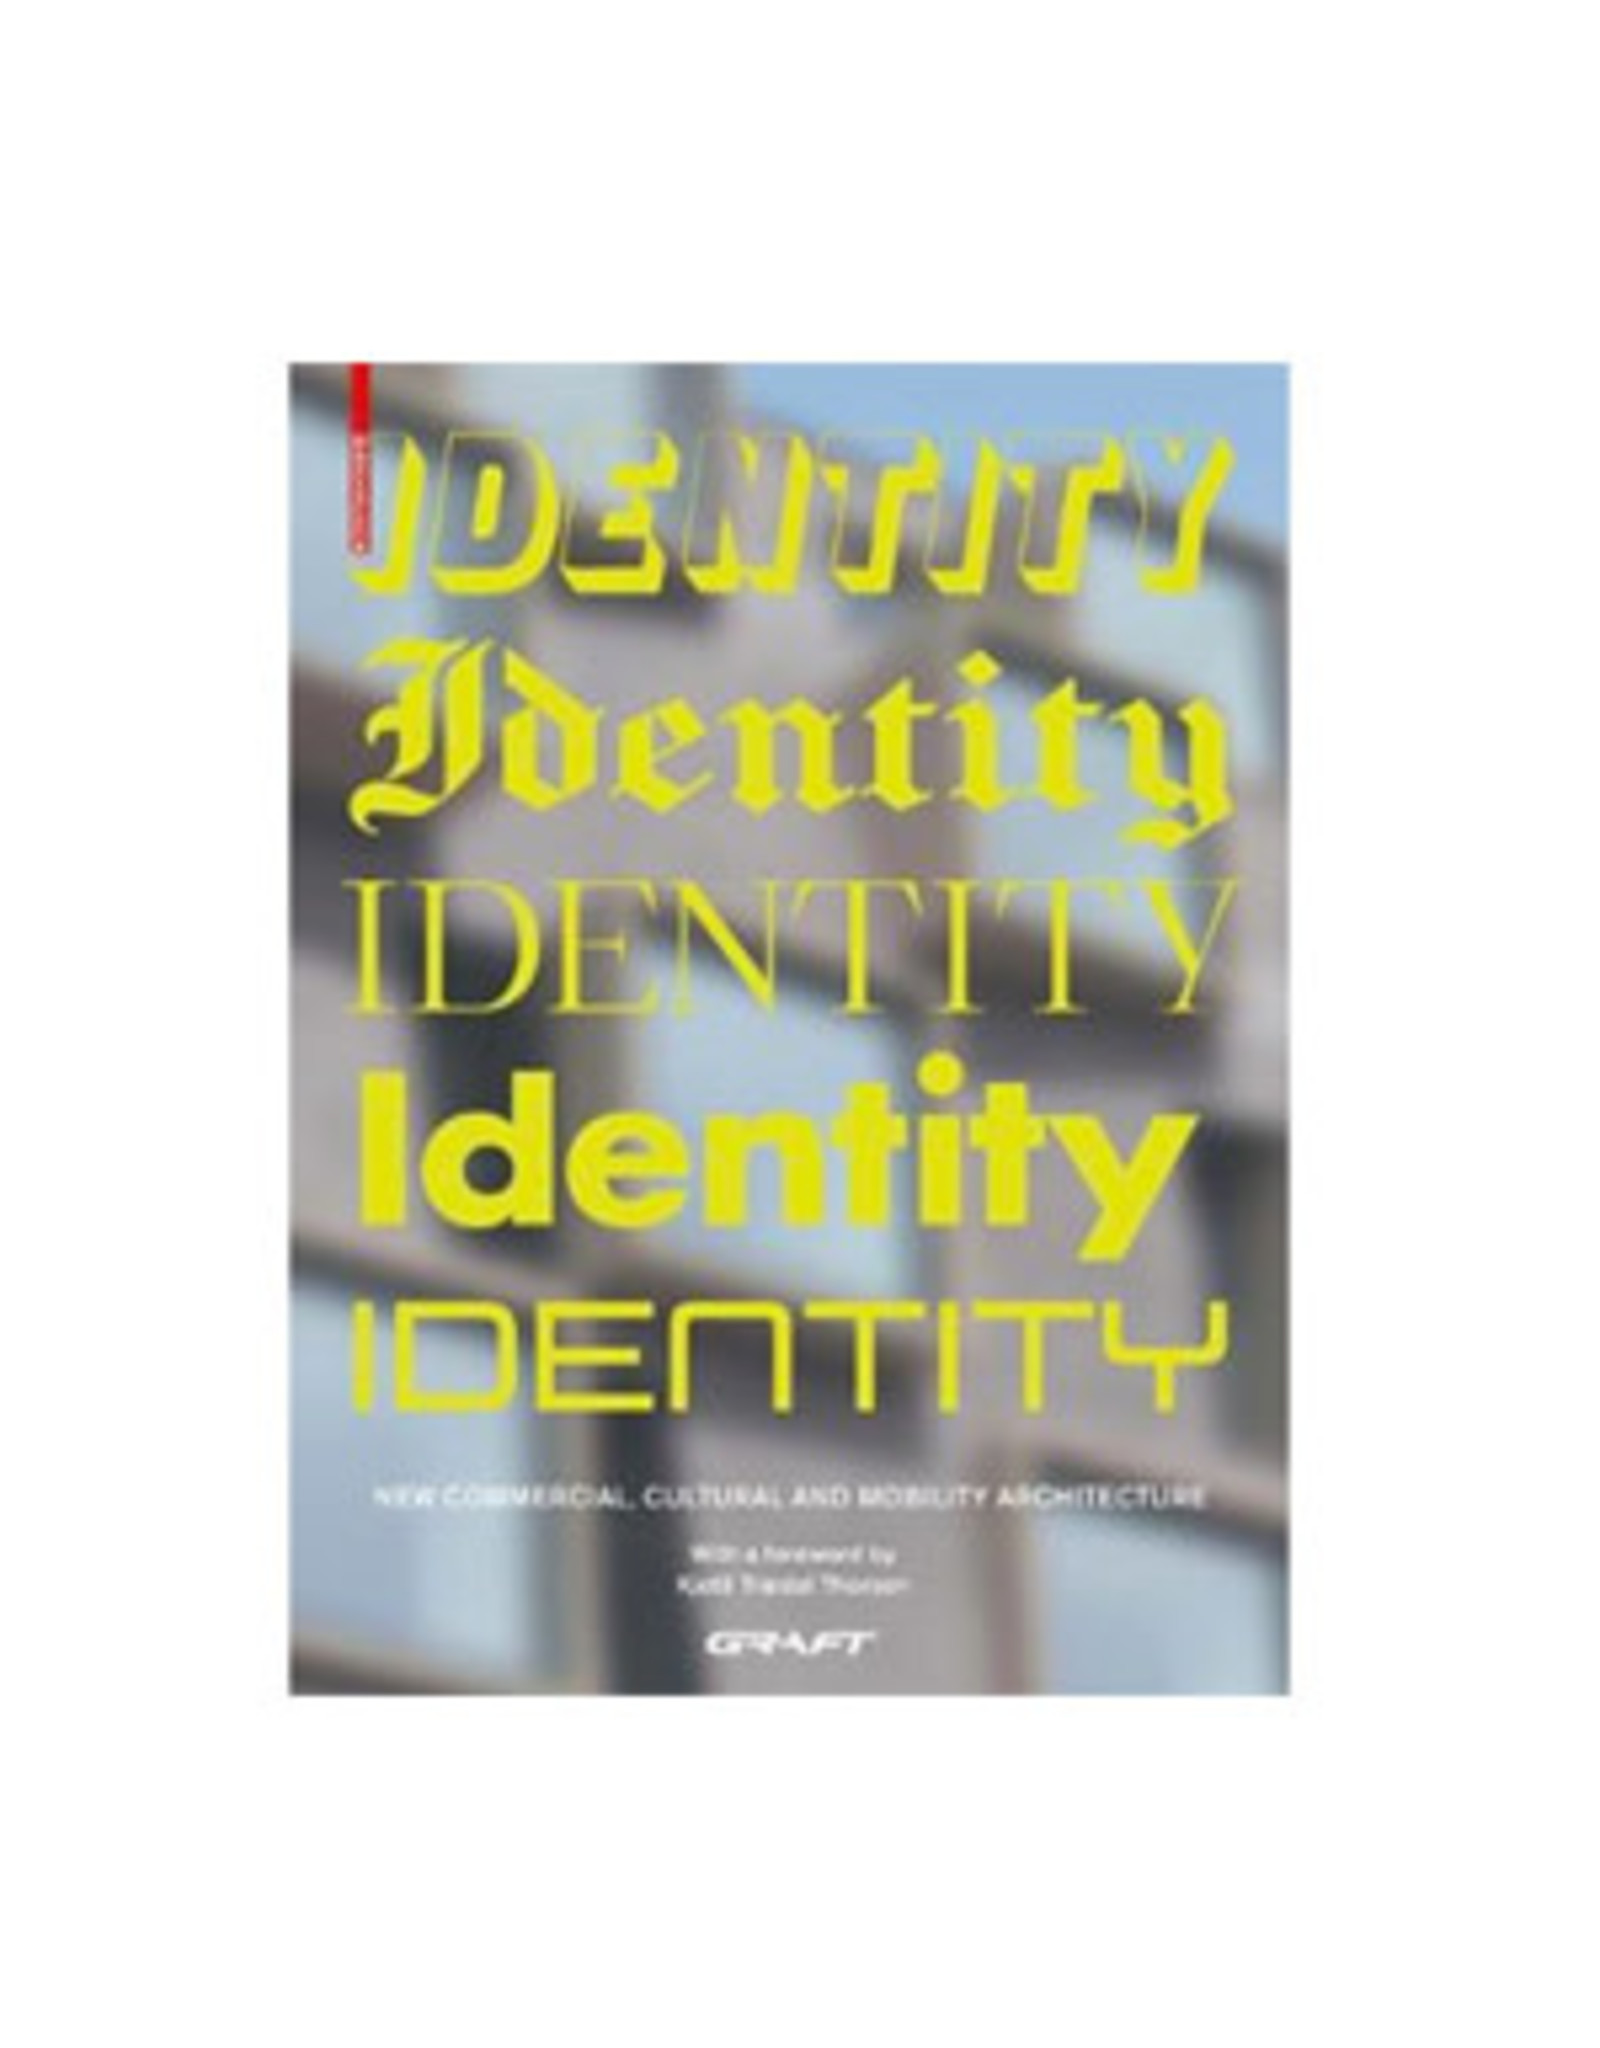 Identity: New Commercial, Cultural and Mobility Architecture